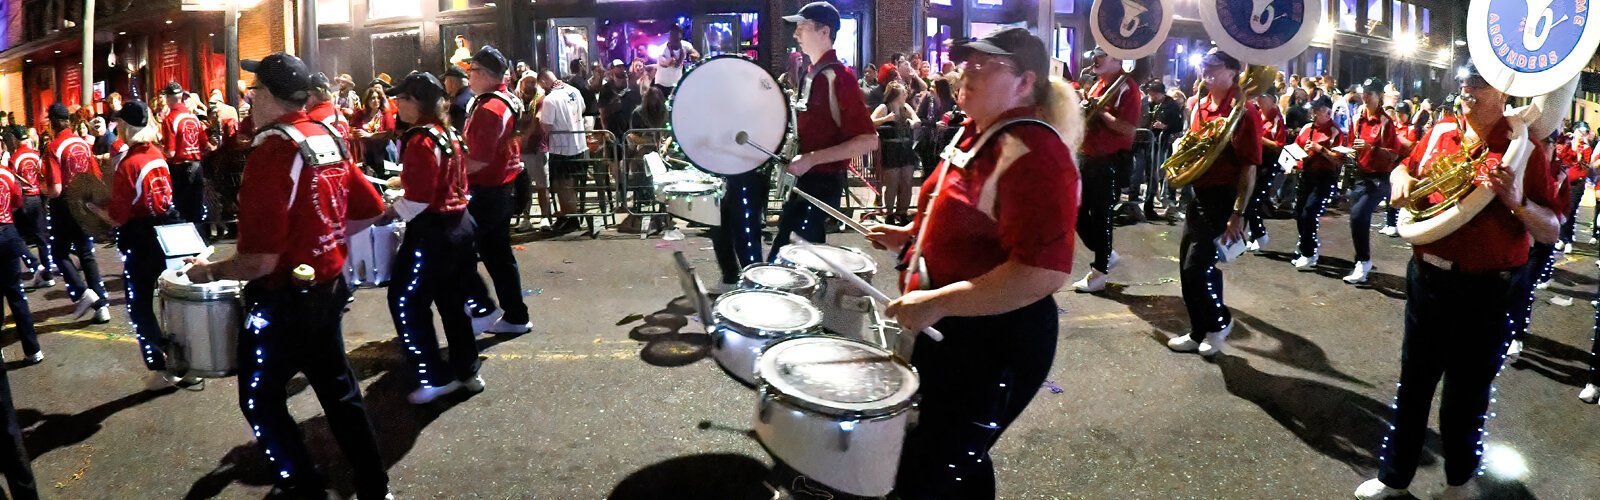 The Awesome Original Second Time Arounders Marching Band of St. Petersburg marches down Ybor City's Seventh Avenue during the Sant’ Yago Knight Parade.